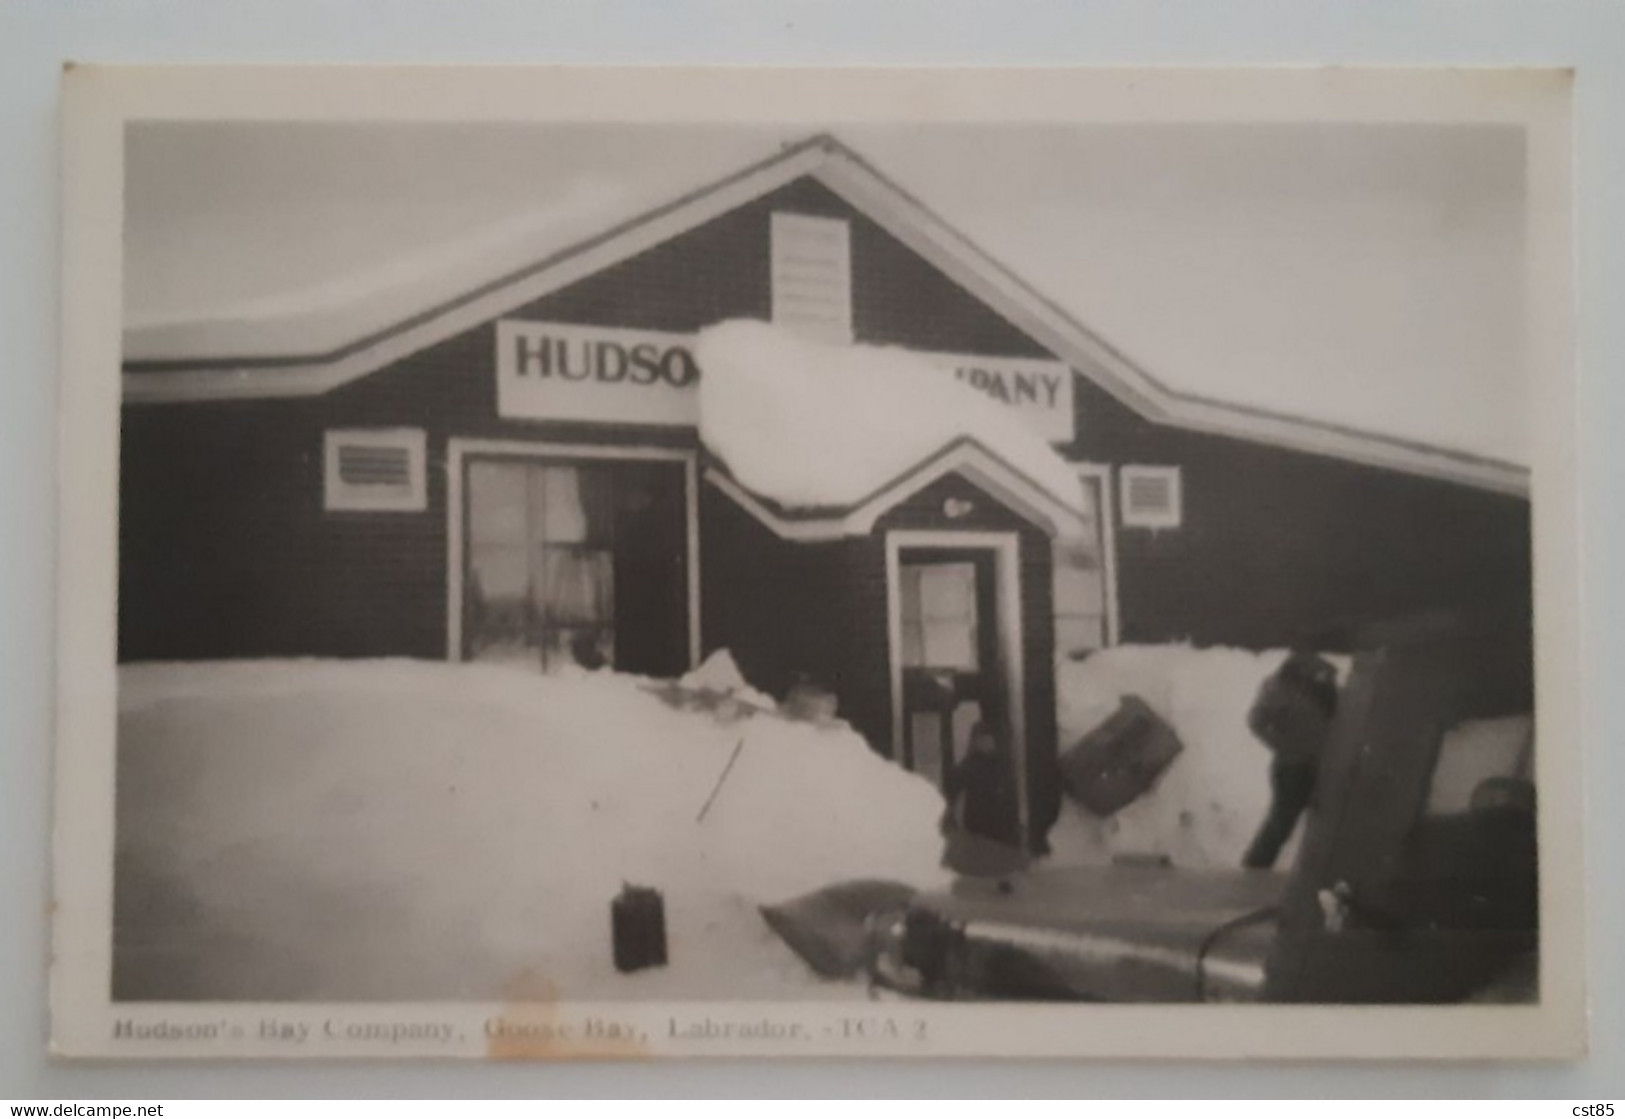 Carte Postale - Hudson's Bay Company , Goose Bay , Labrador - TCA 2 Voiture Ancienne - Other & Unclassified